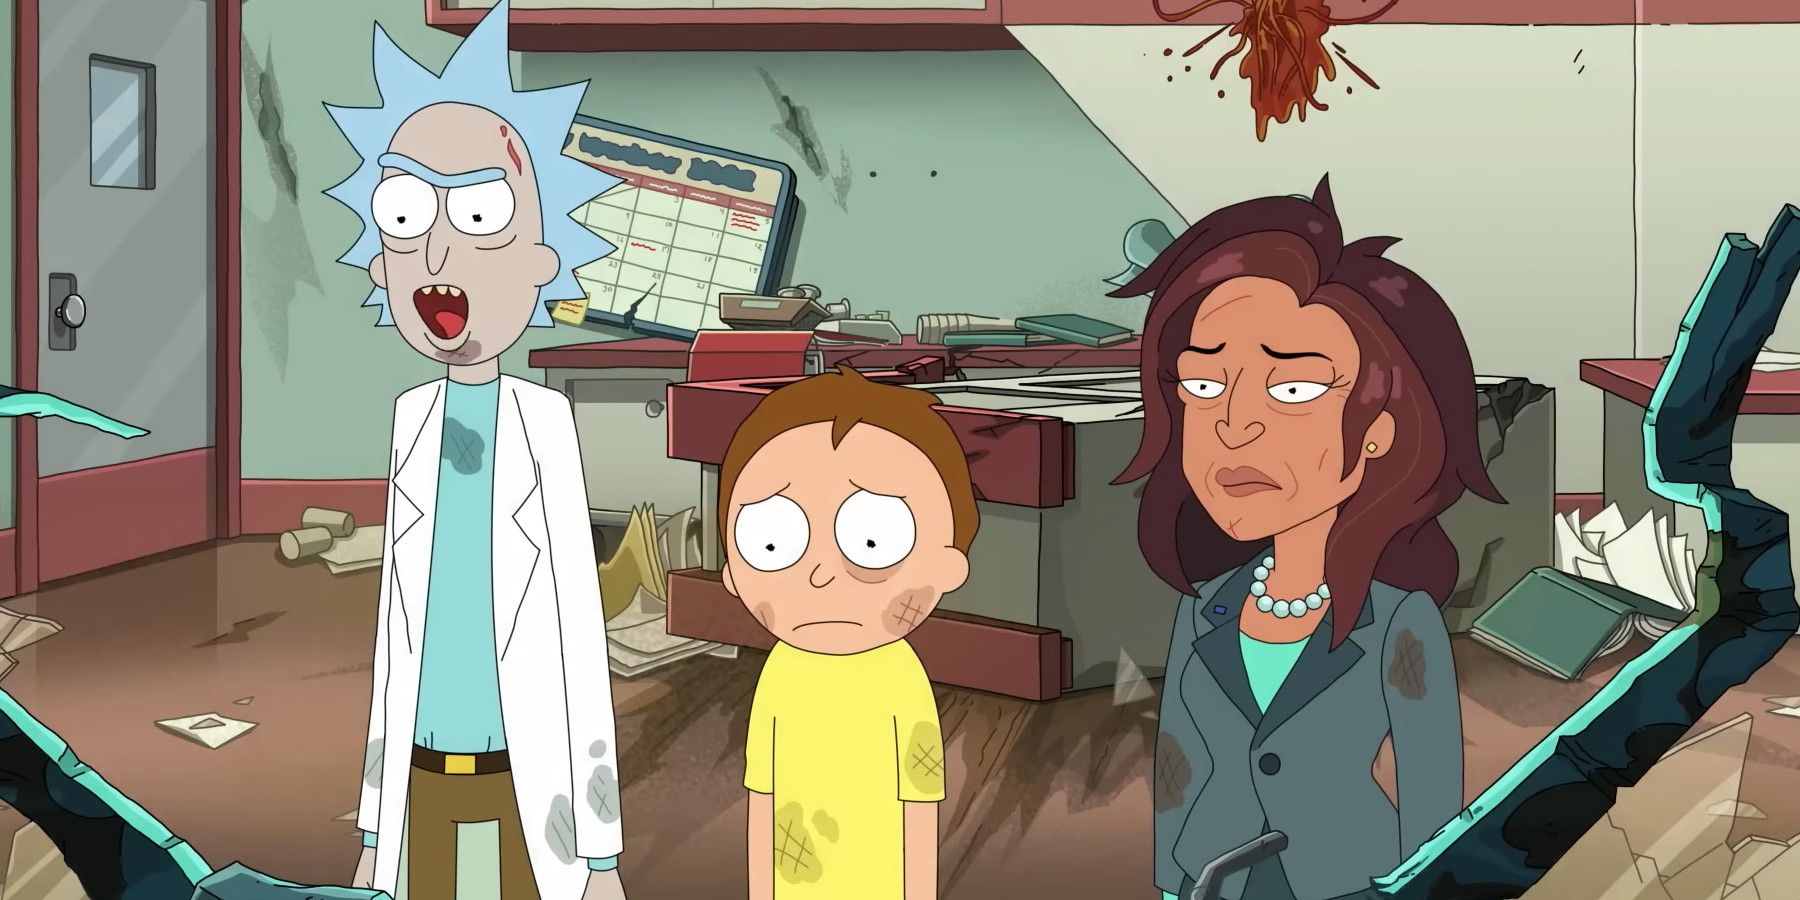 Rick and Morty News, Discussion, and More!